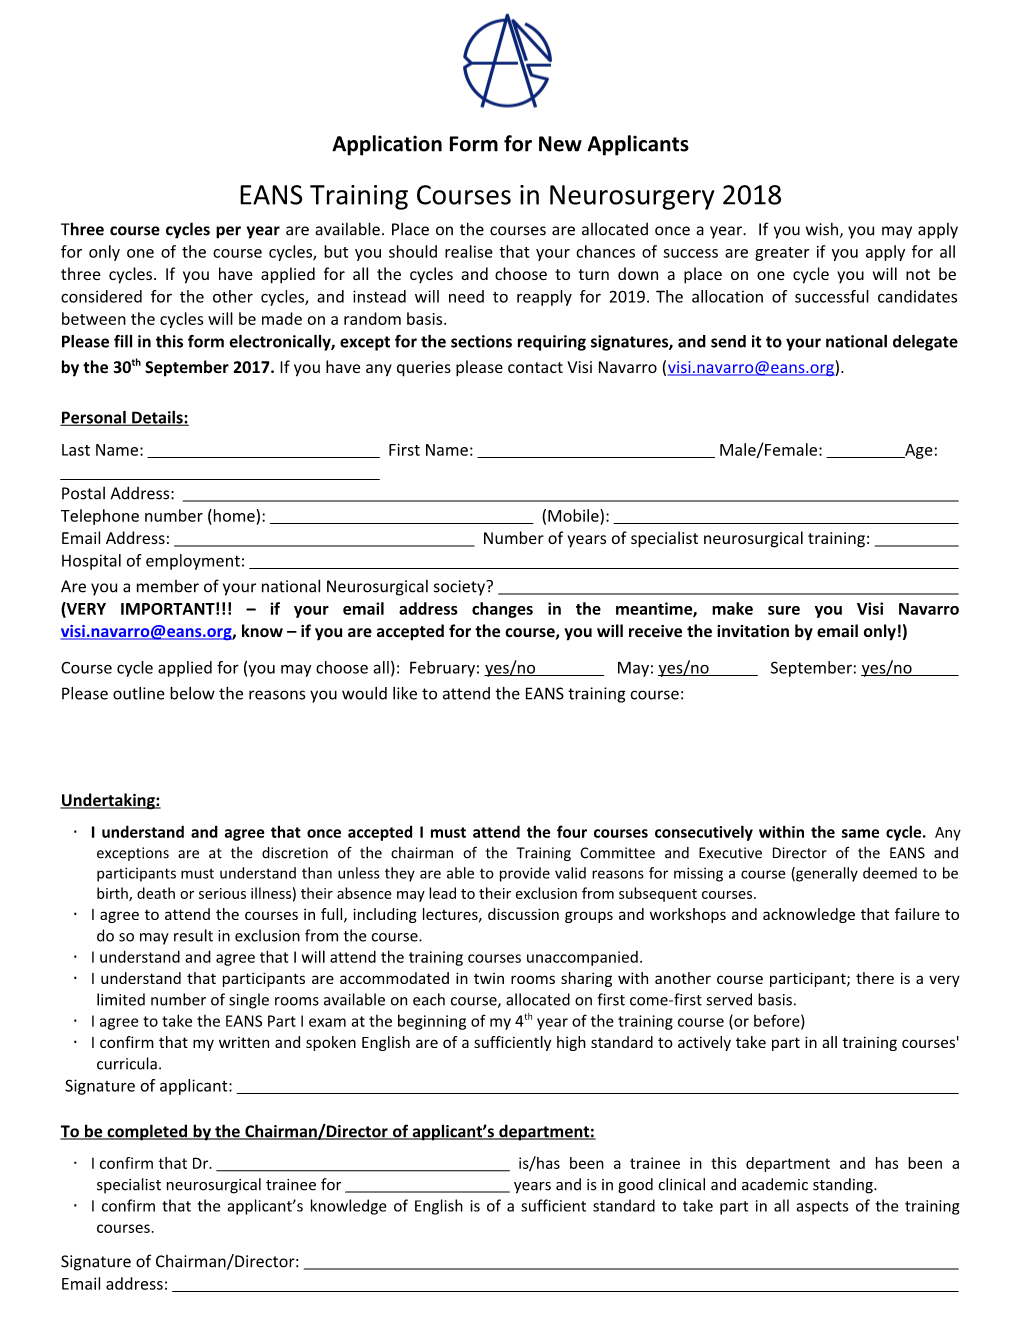 EANS Training Course in Neurosurgery